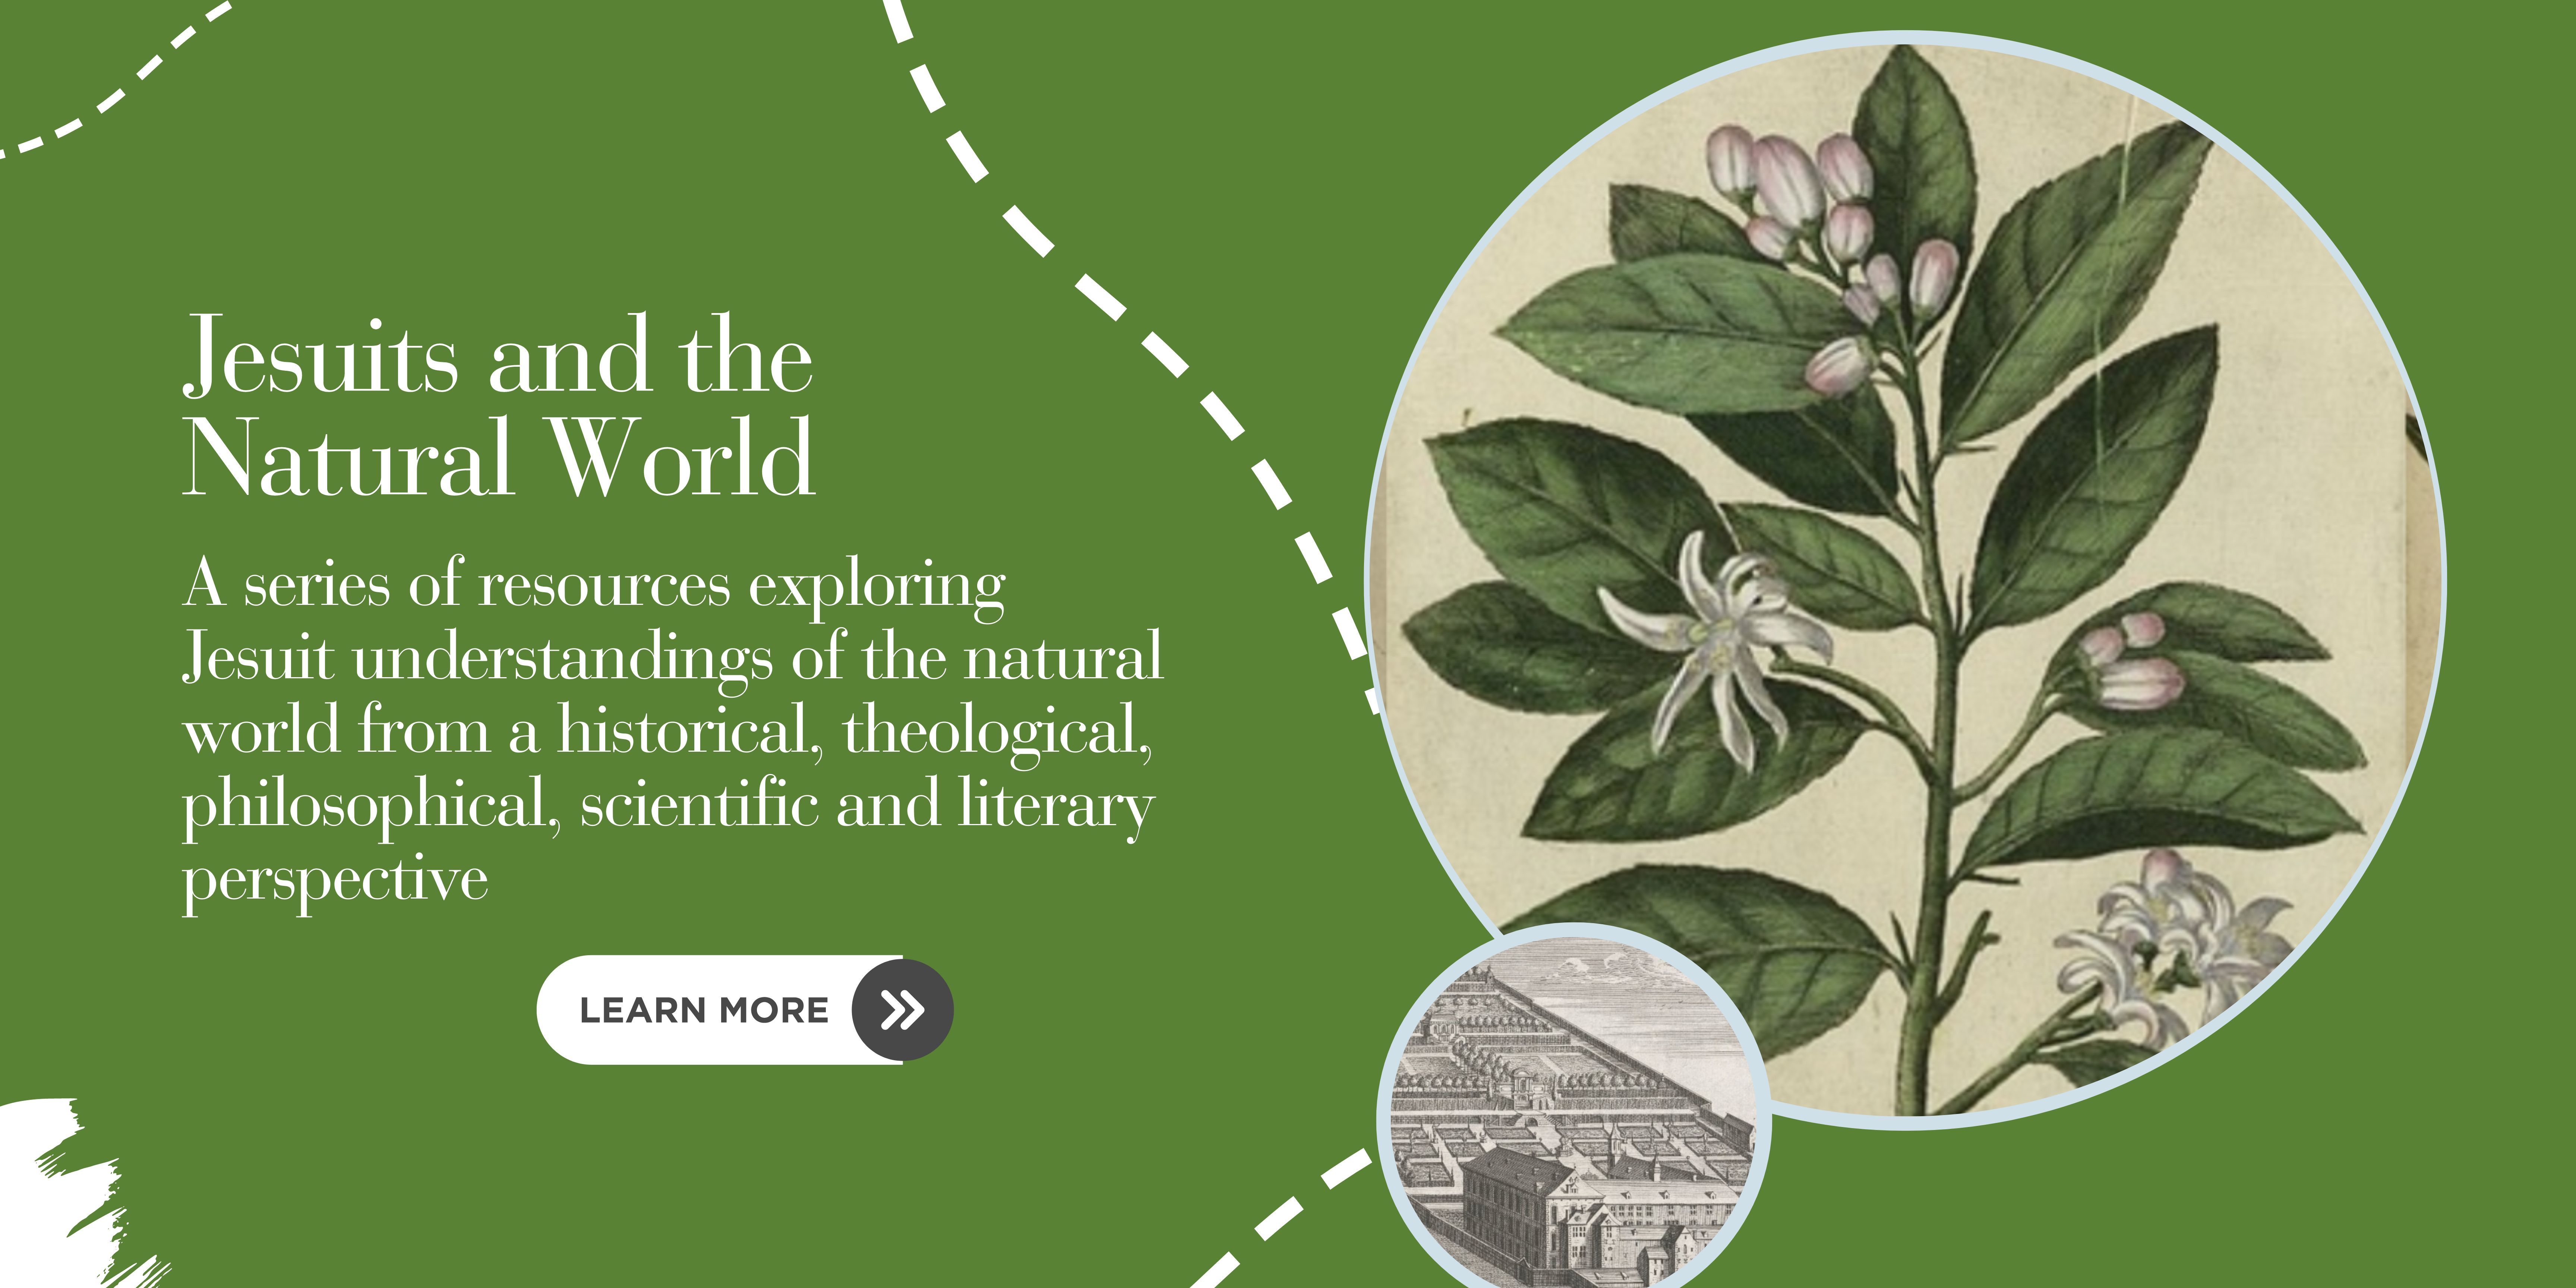 Jesuits and the Natural World: New Resources from the LSRI